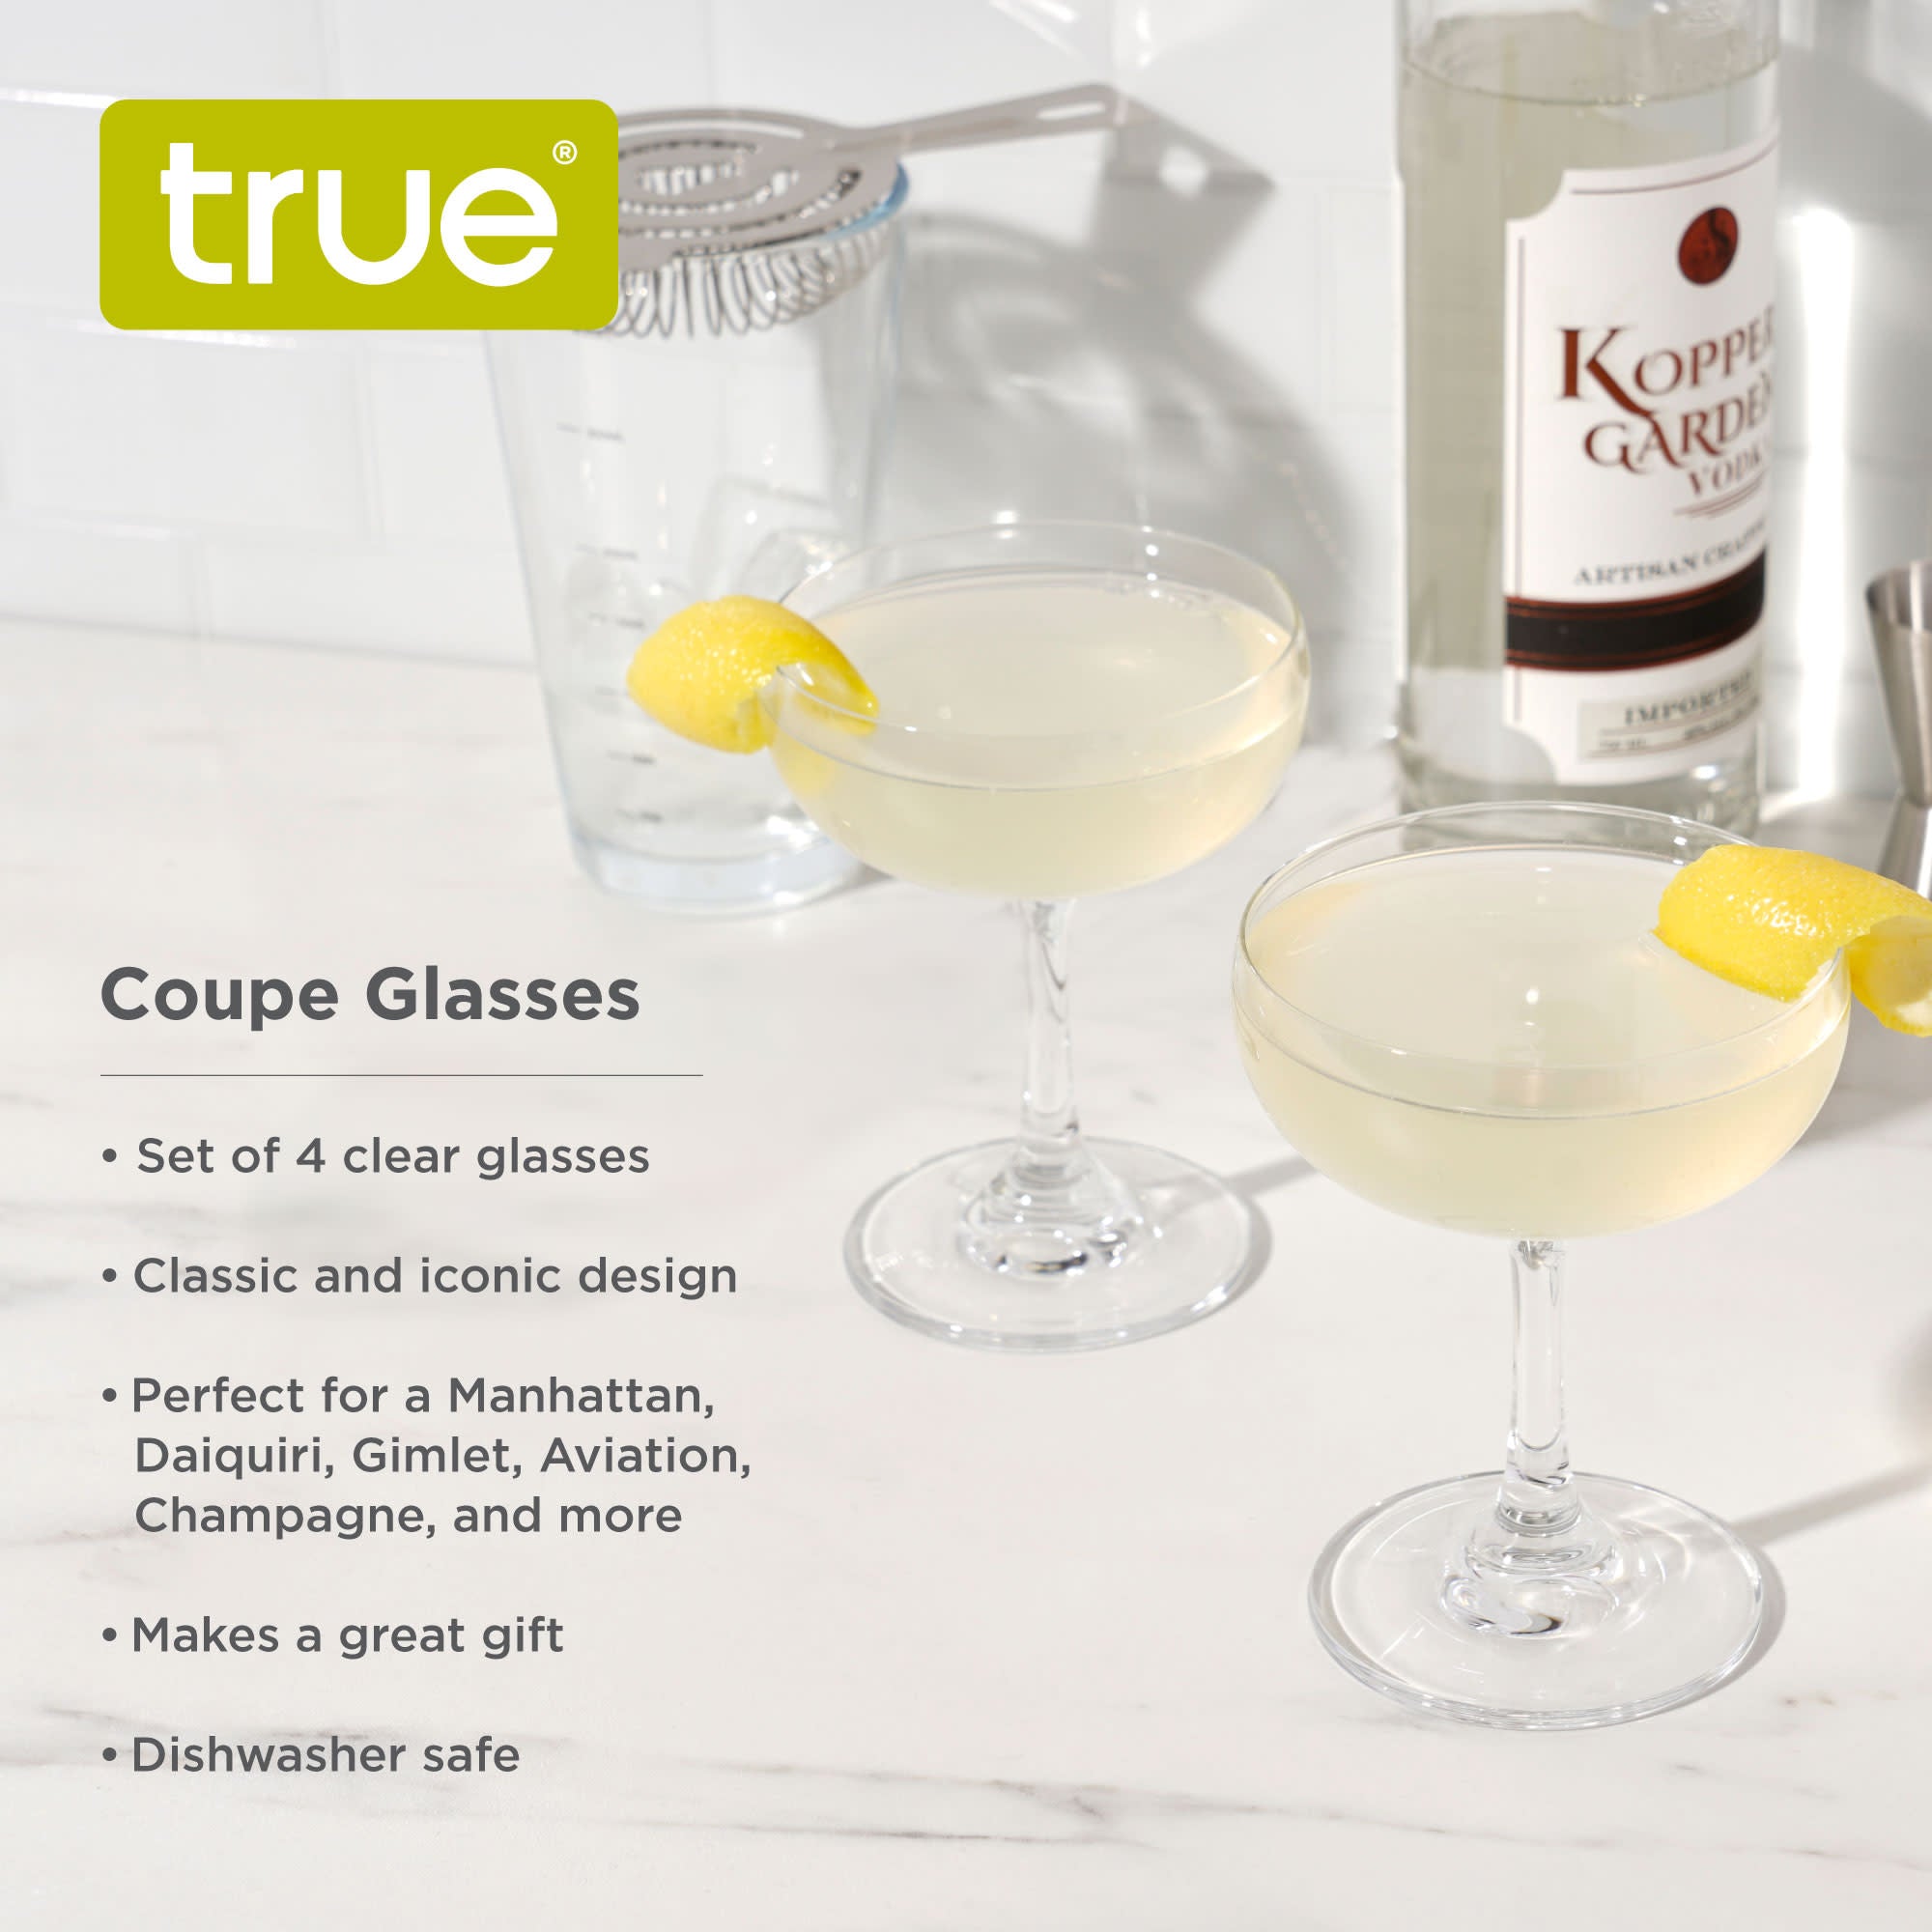 7 oz Coupe Glasses, Set of 4 by True